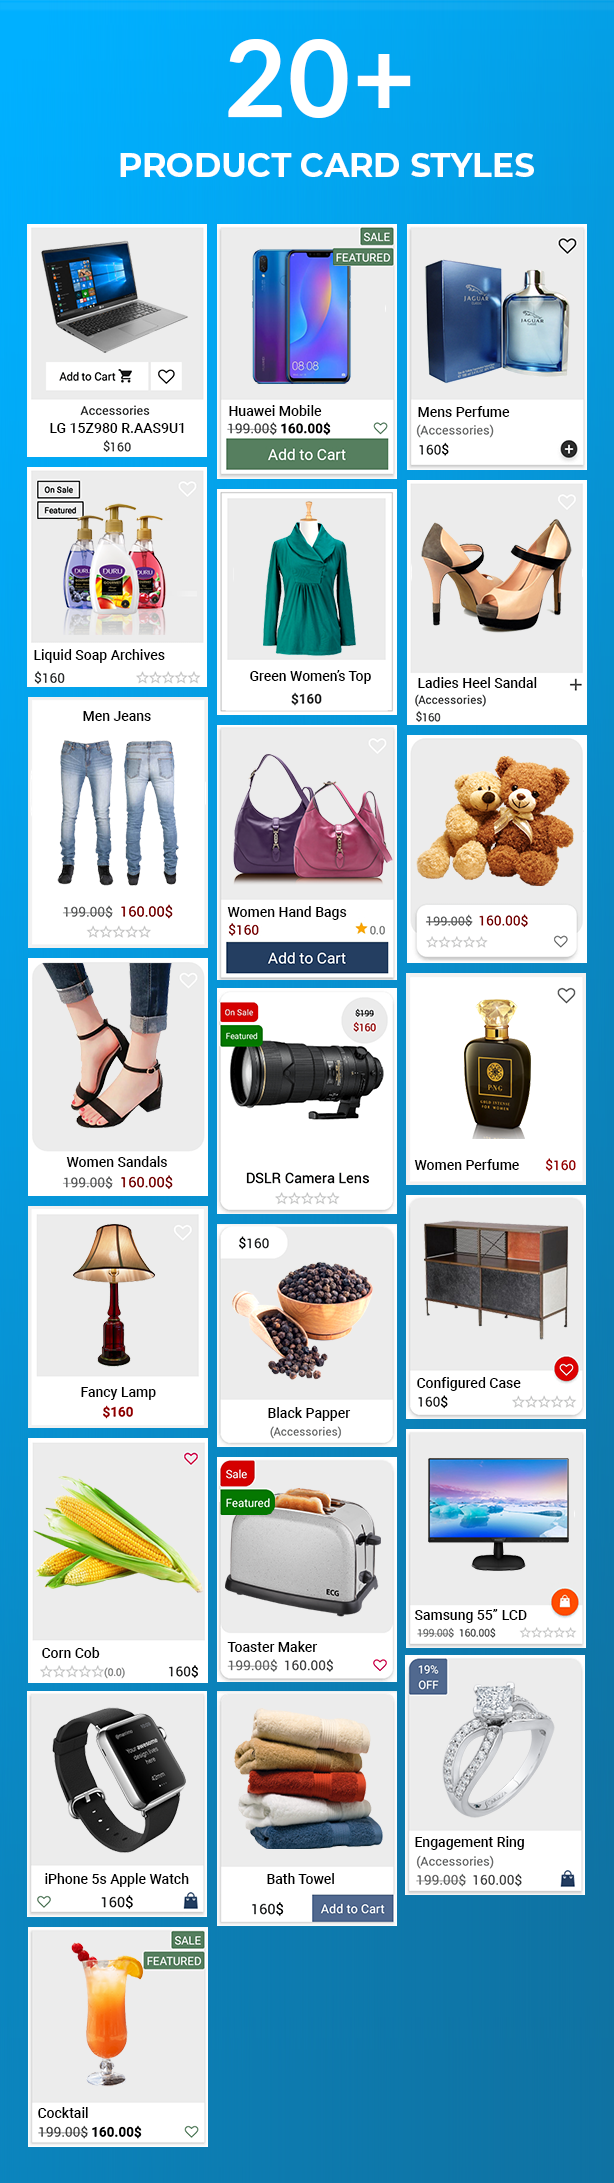 Ionic5 Ecommerce - Universal iOS & Android Ecommerce / Store Full Mobile App with Laravel CMS - 10